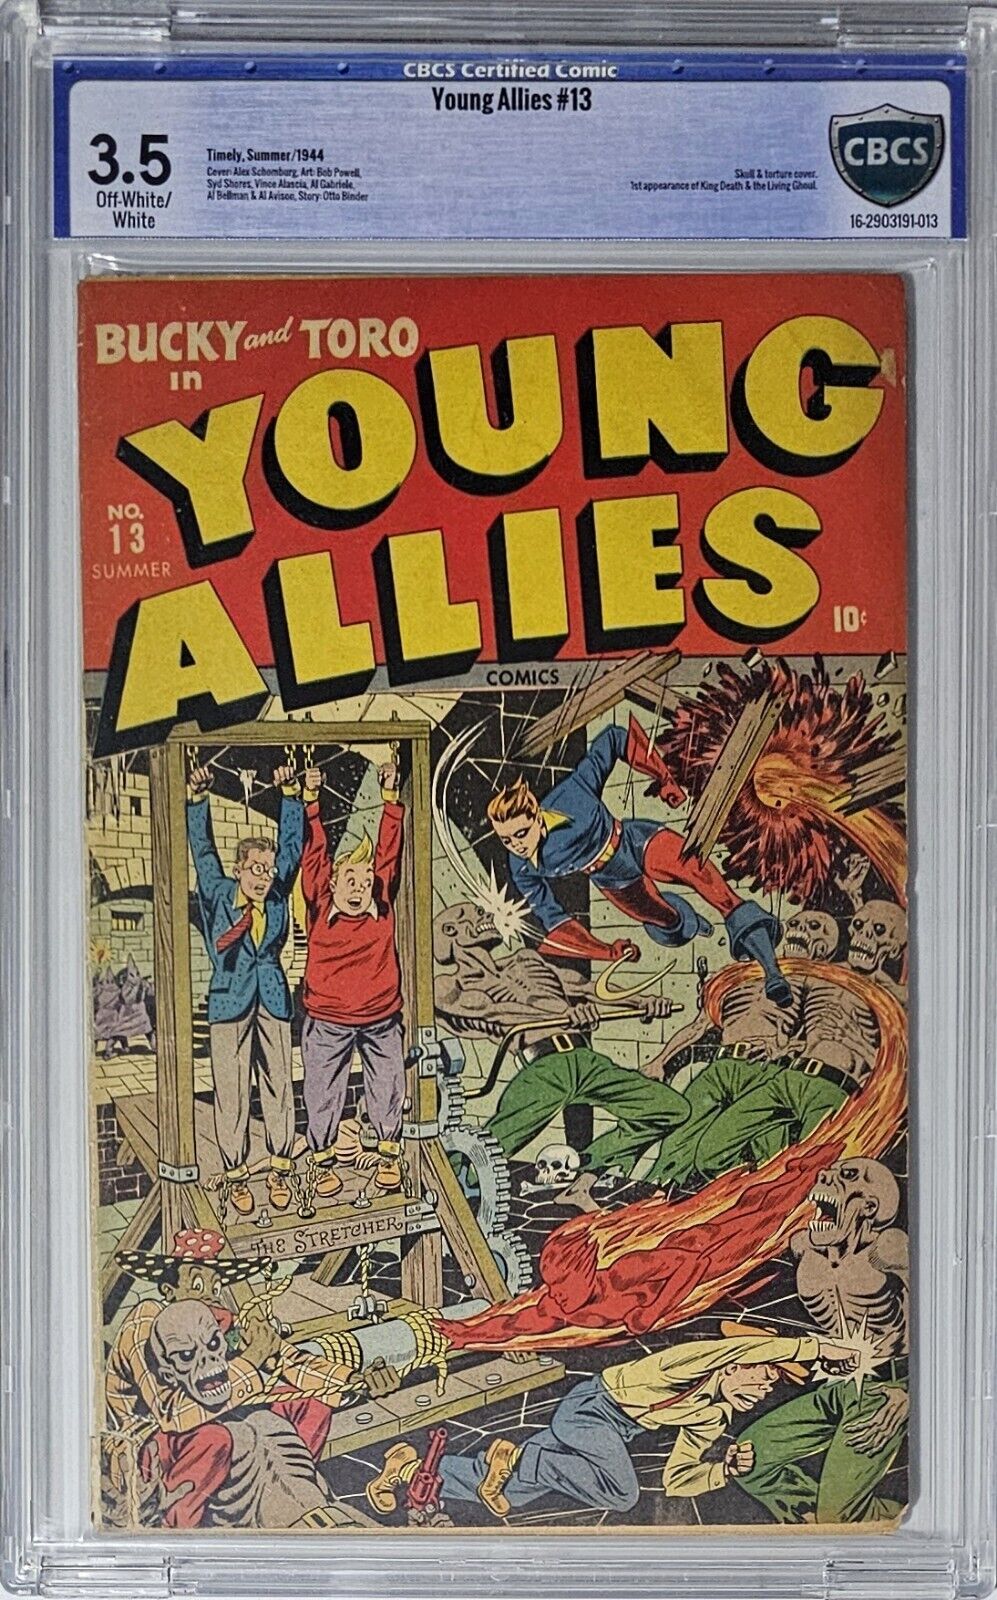 Young Allies #13 CBCS 3.5 Timely Comics 1944 Golden Age Skull & Torture Cover